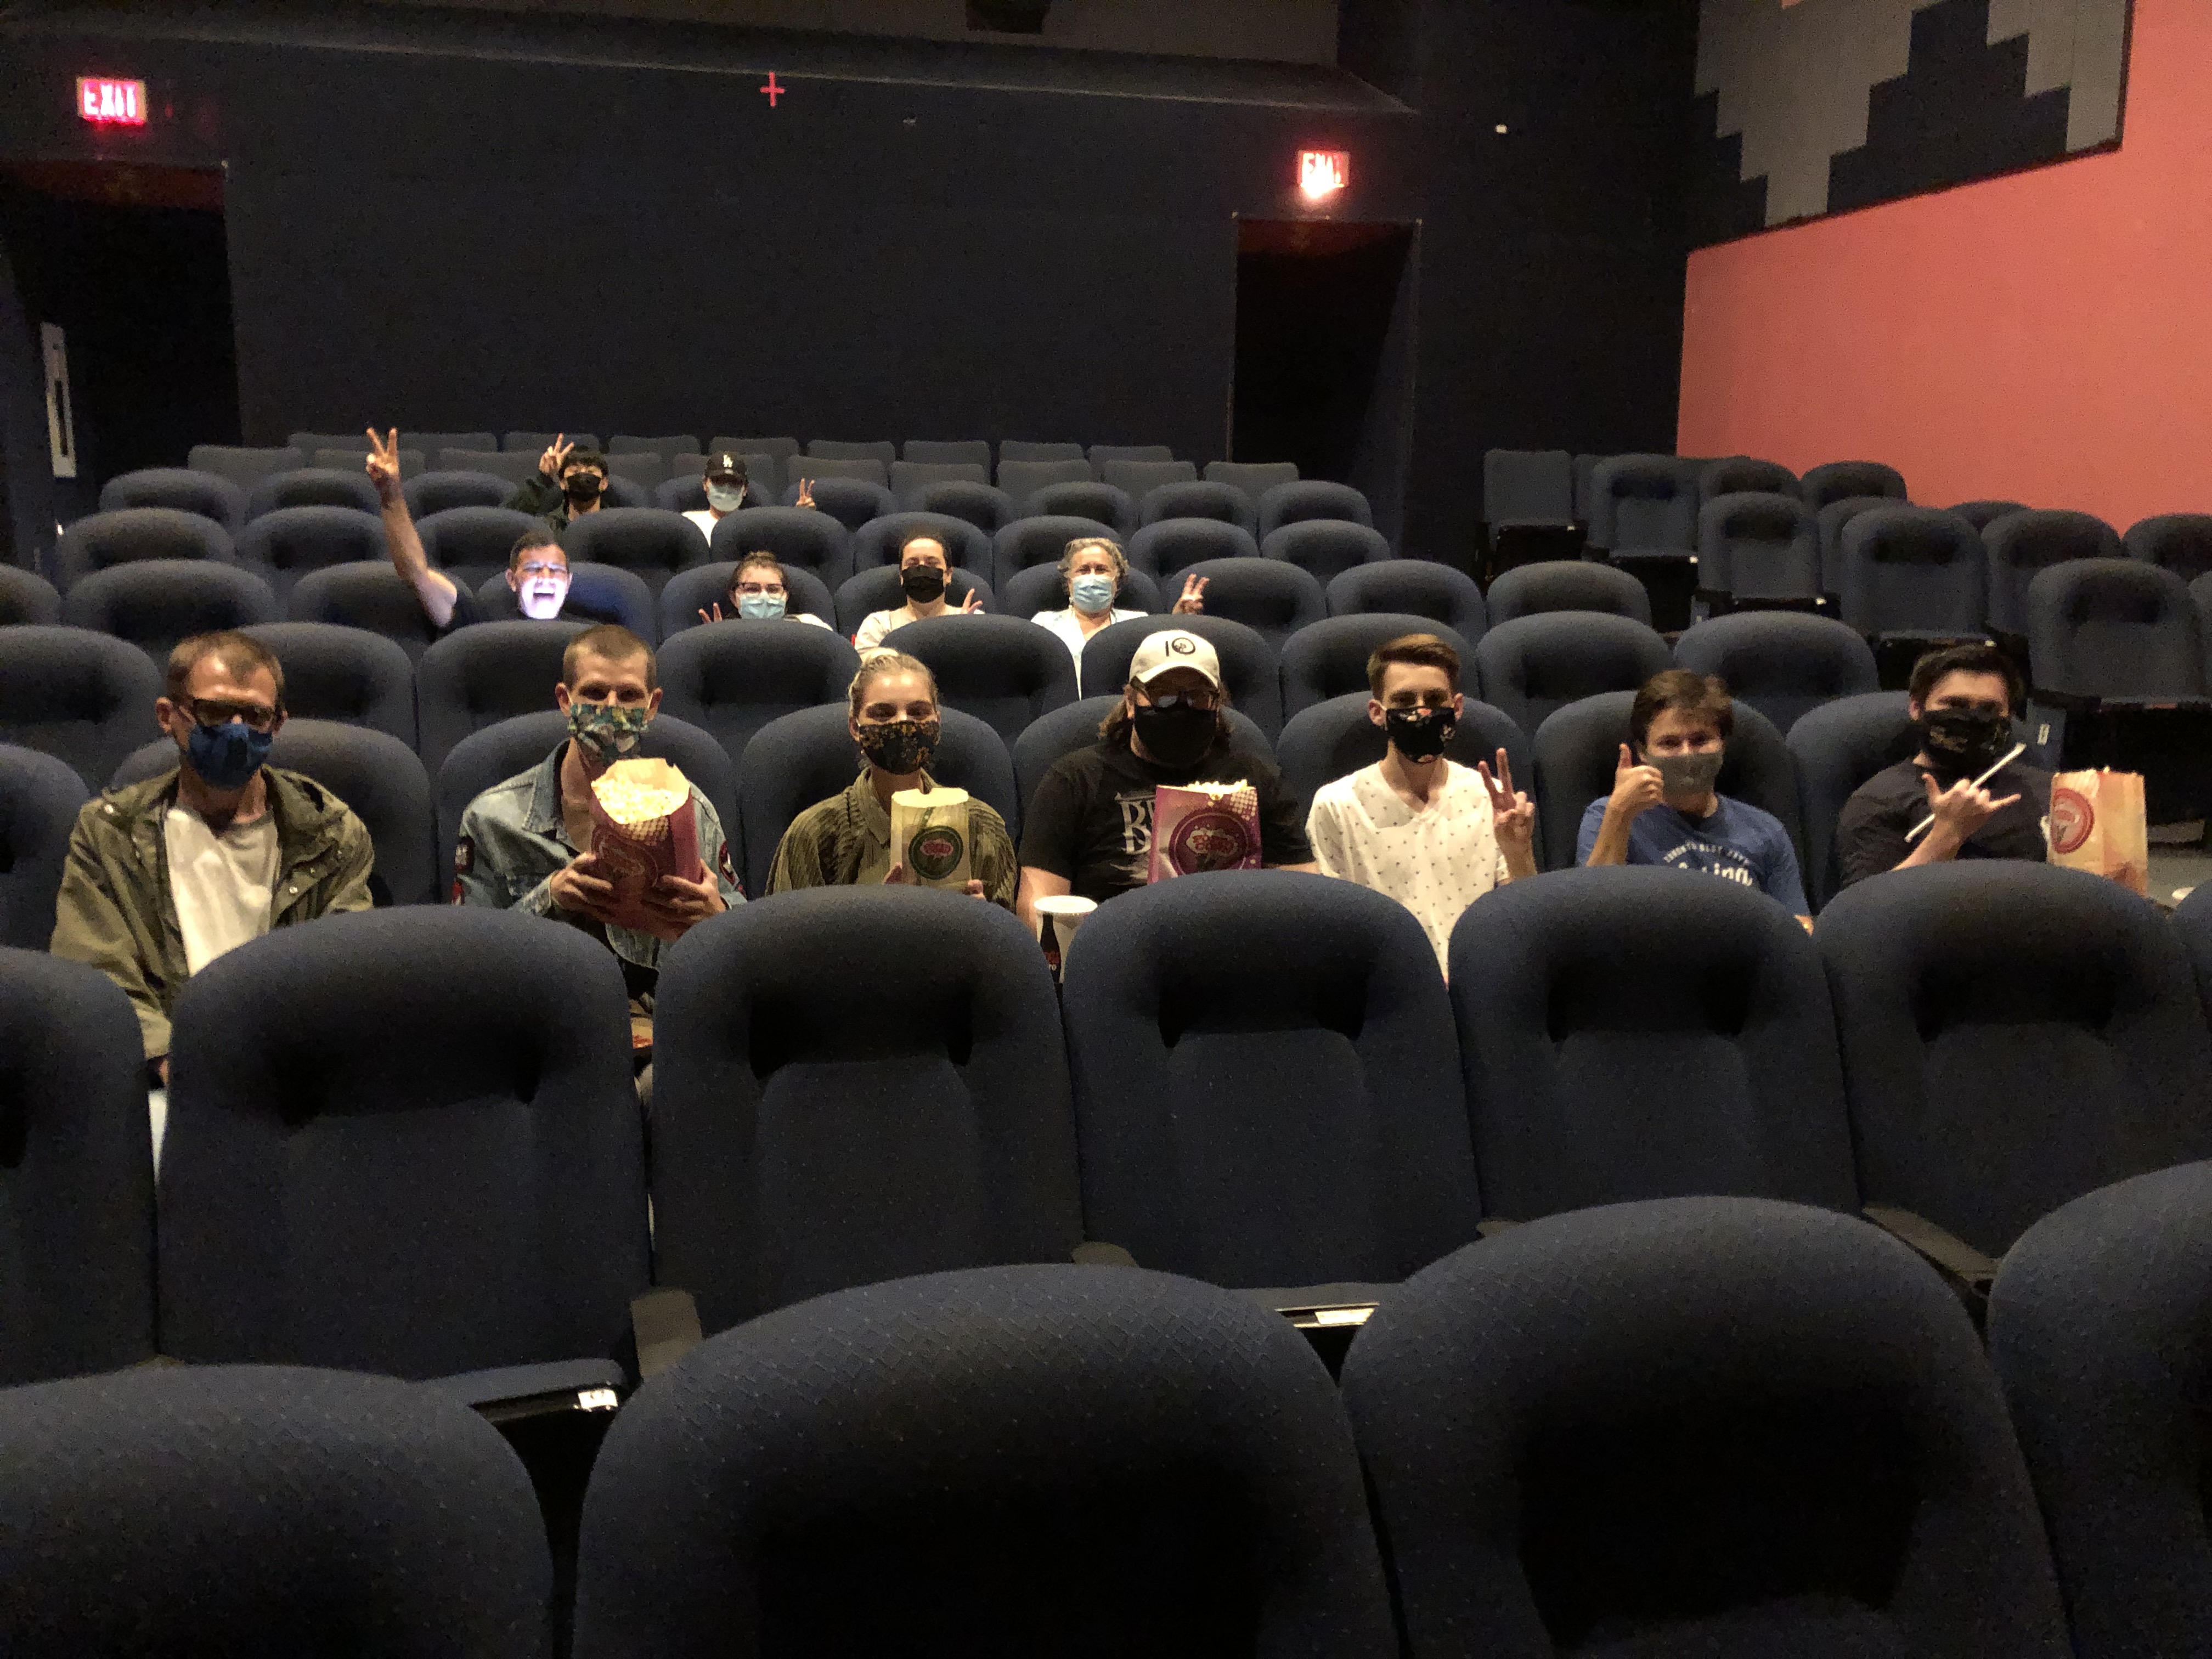 Excited moviegoers just before the 12:10 a.m. show of F9 (Fast & Furious 9)